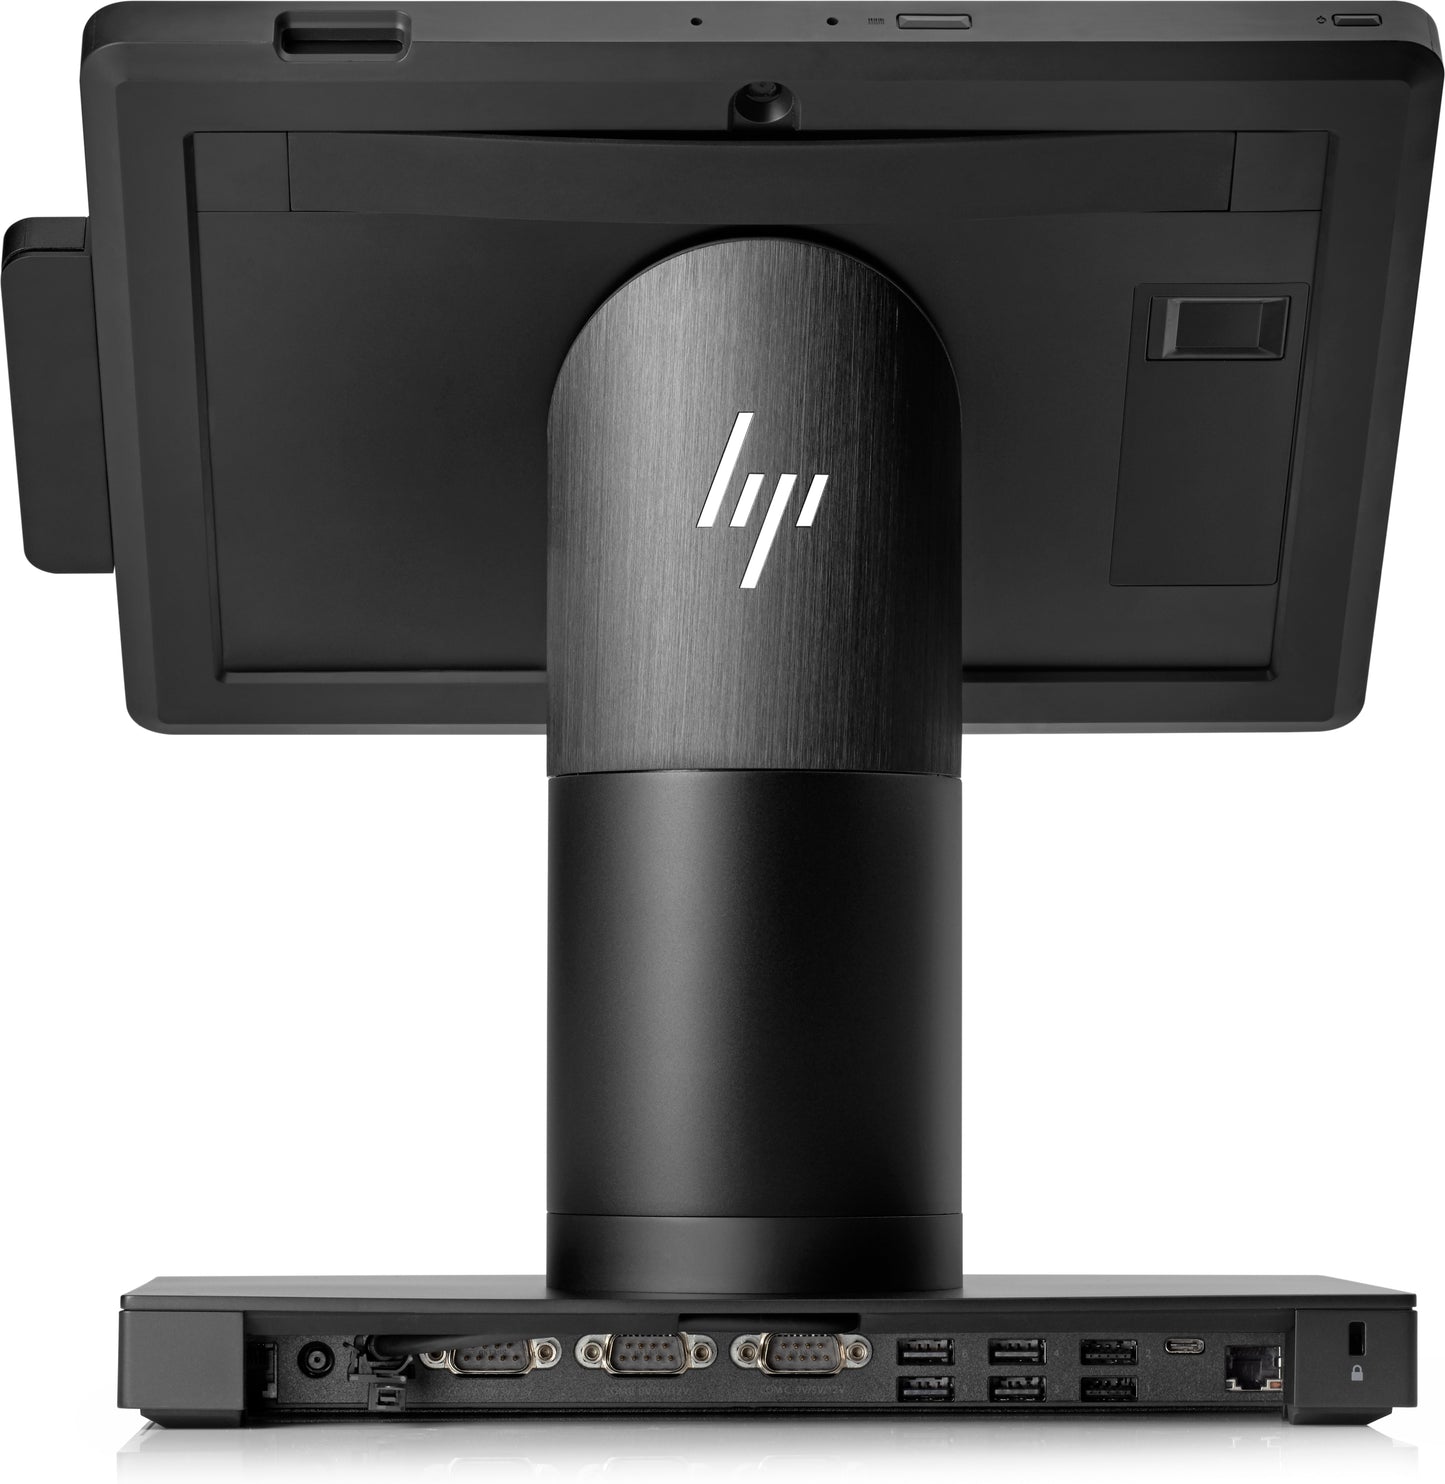 HP ENGAGEGO MOBILE RETAIL CASE WITH MSR